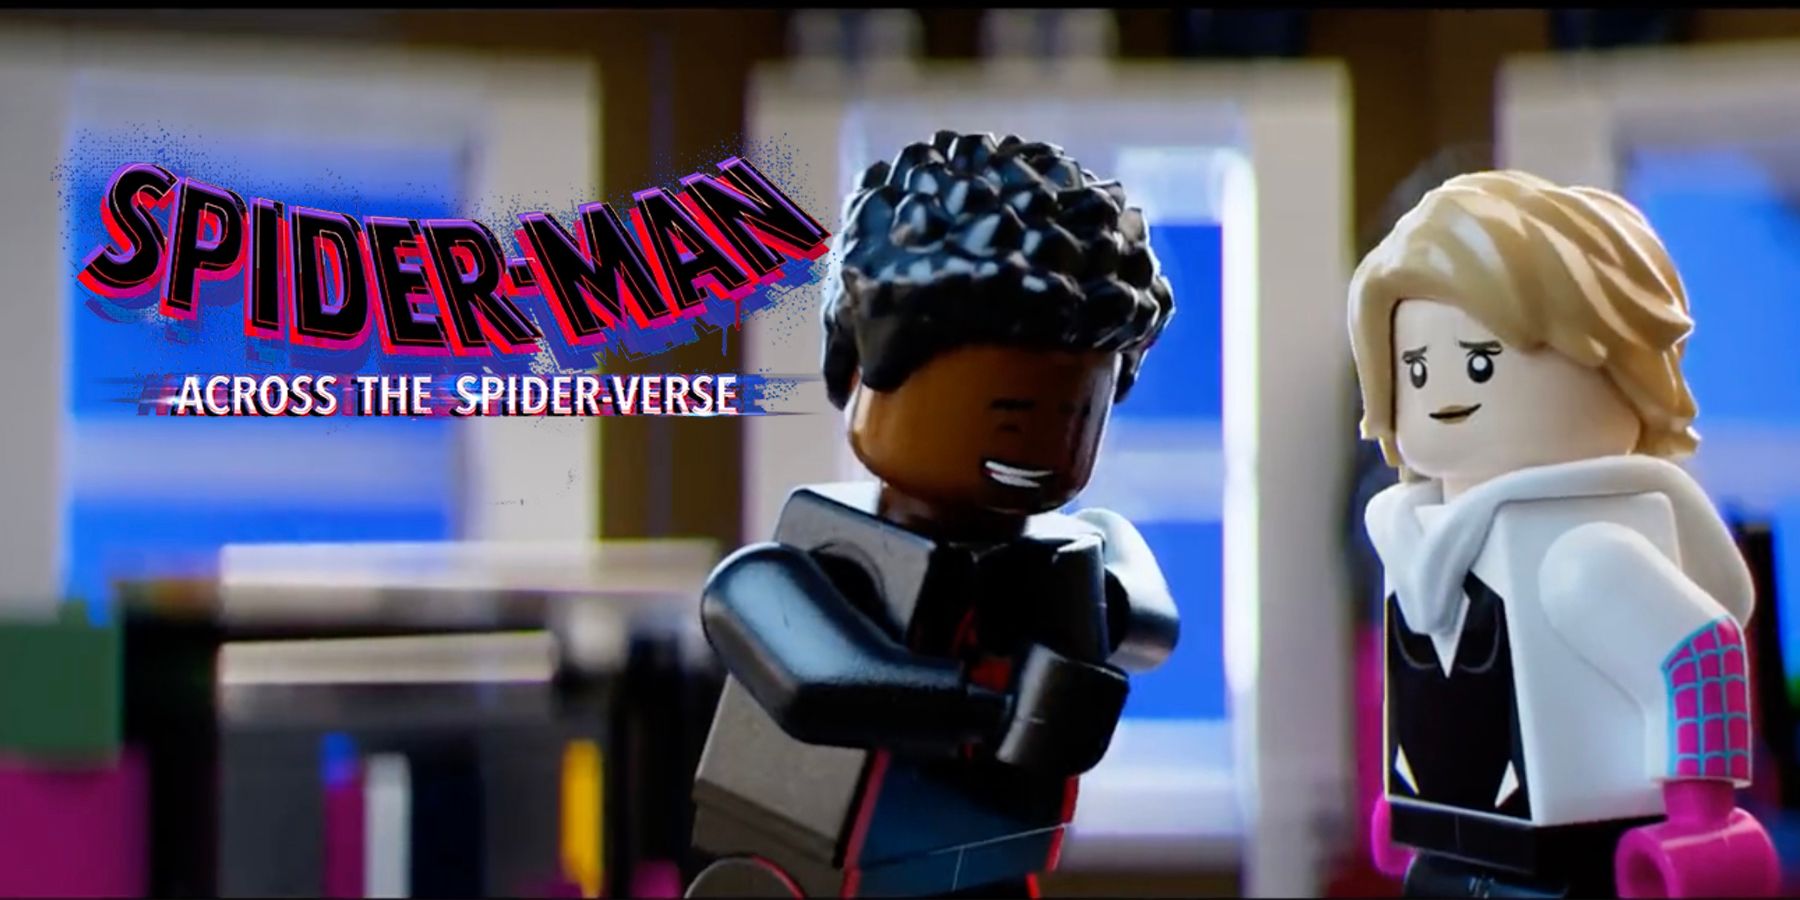 Spider-Man: Across The Spider-Verse LEGO Bloopers Released By Artist